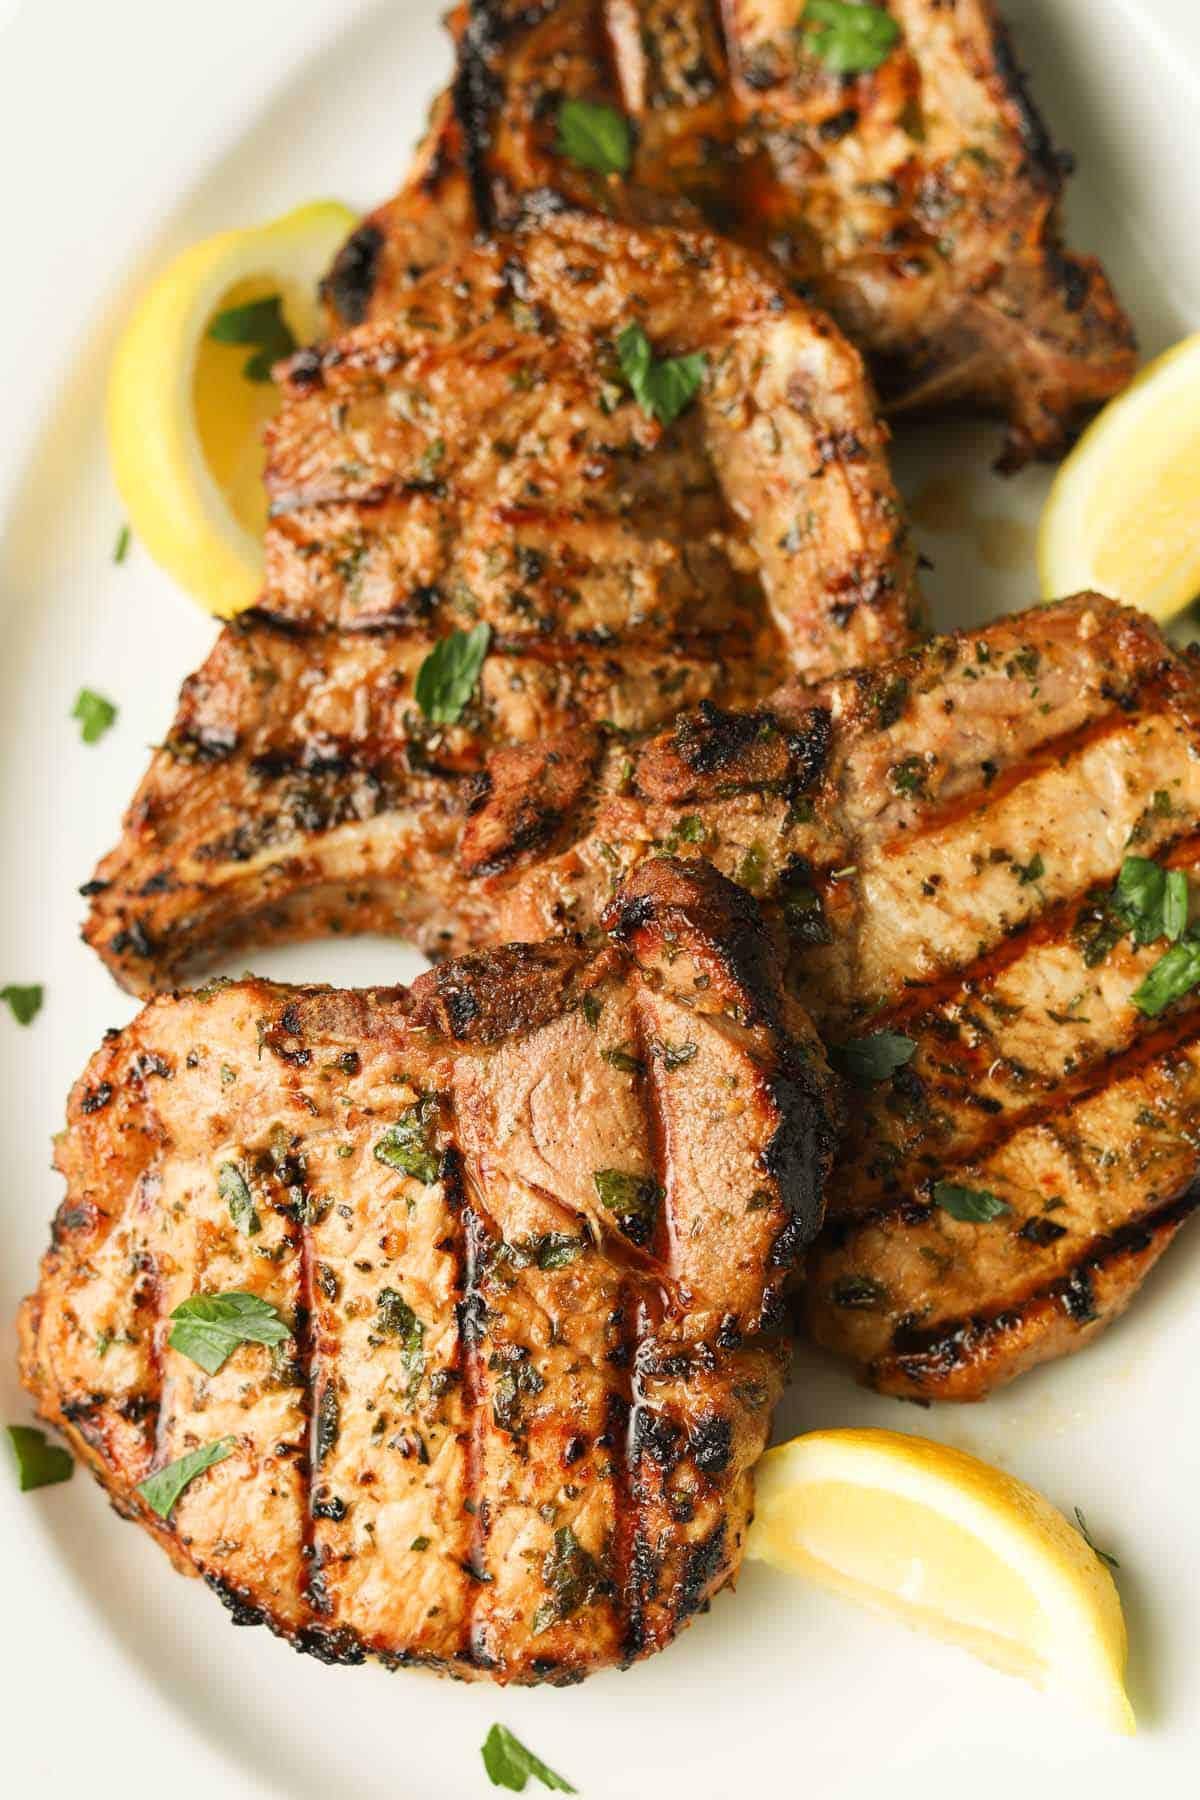 Plate of grilled pork chops with lemon.